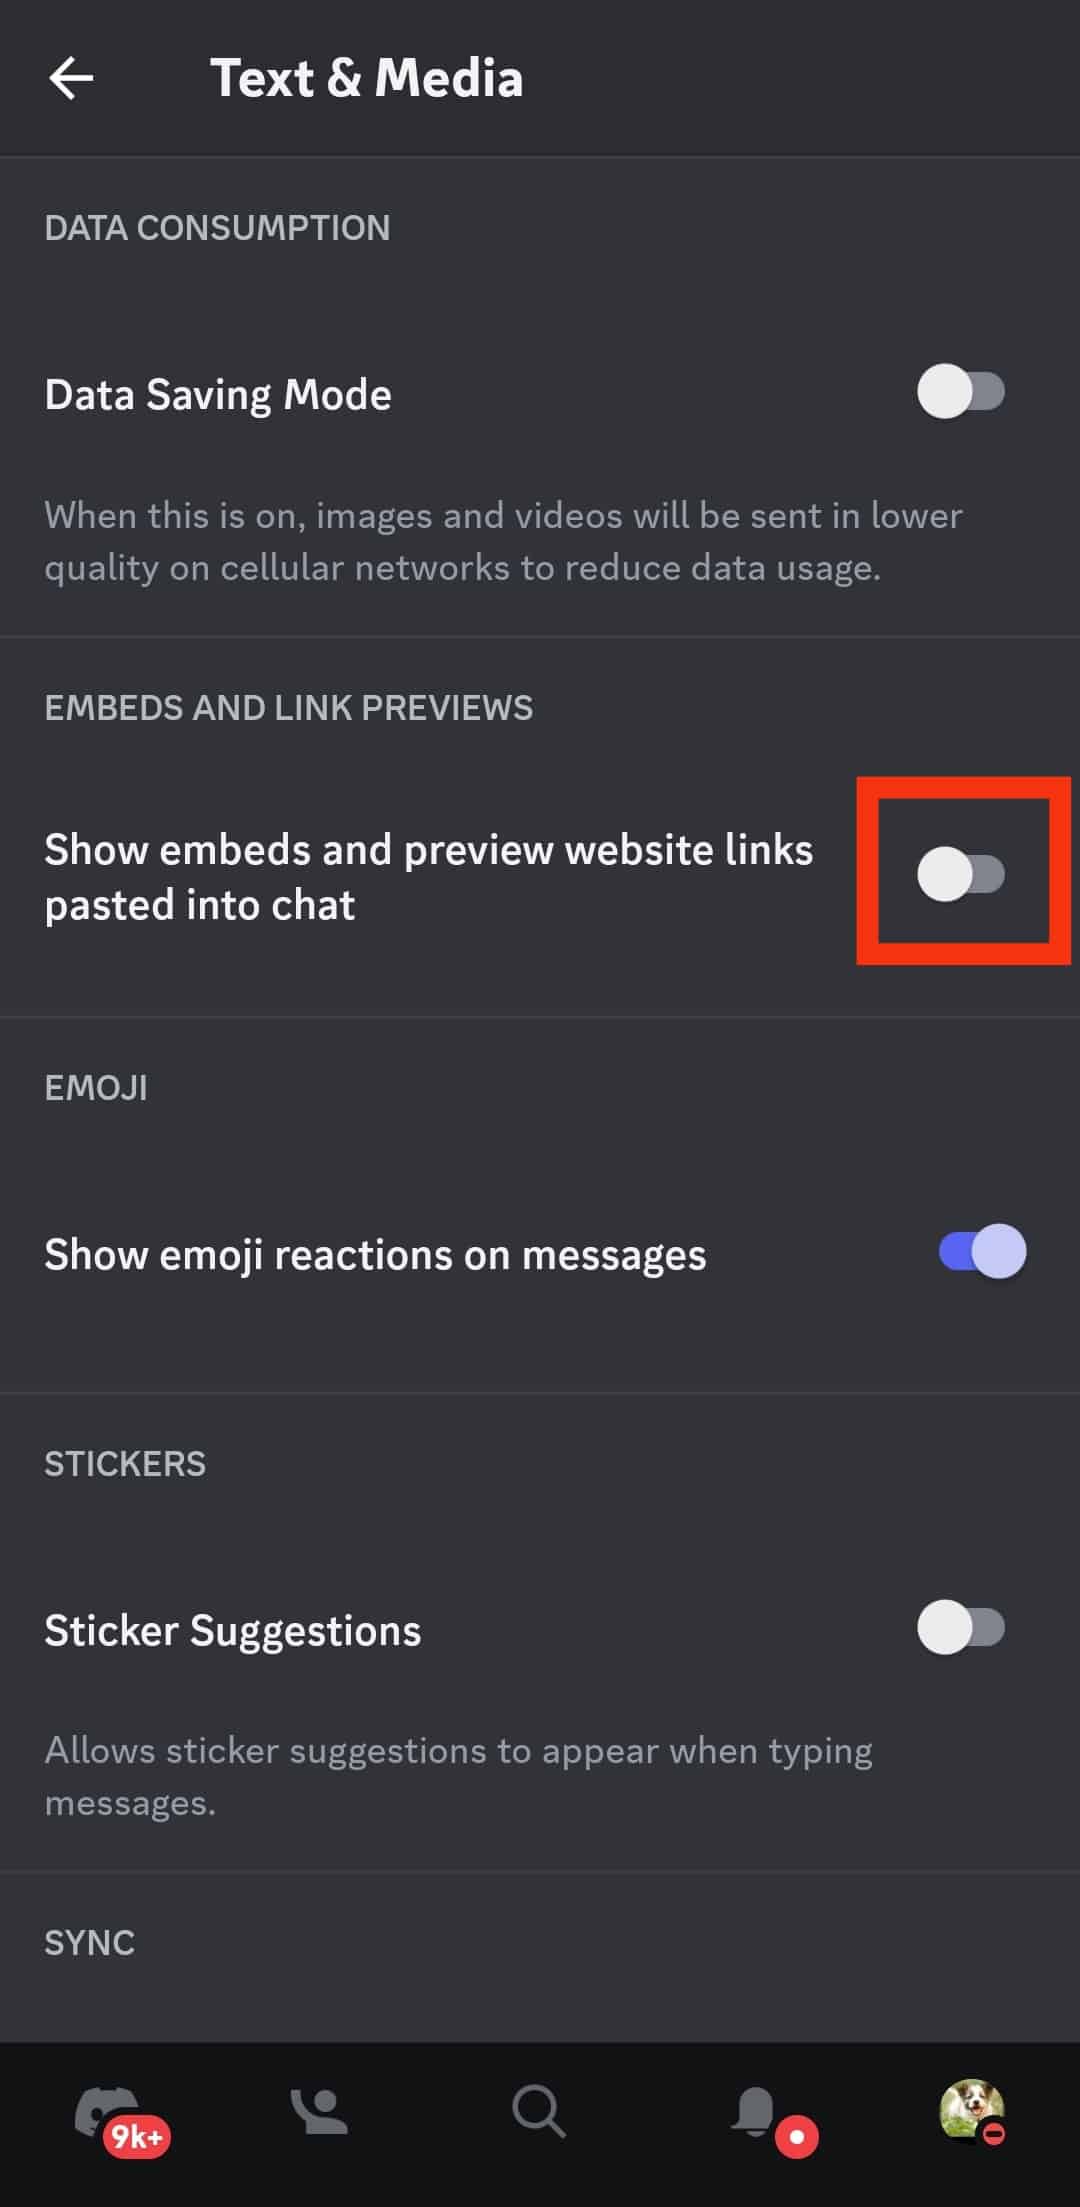 Turn Off The Show Embed And Preview Website Links Pasted Into Chat.